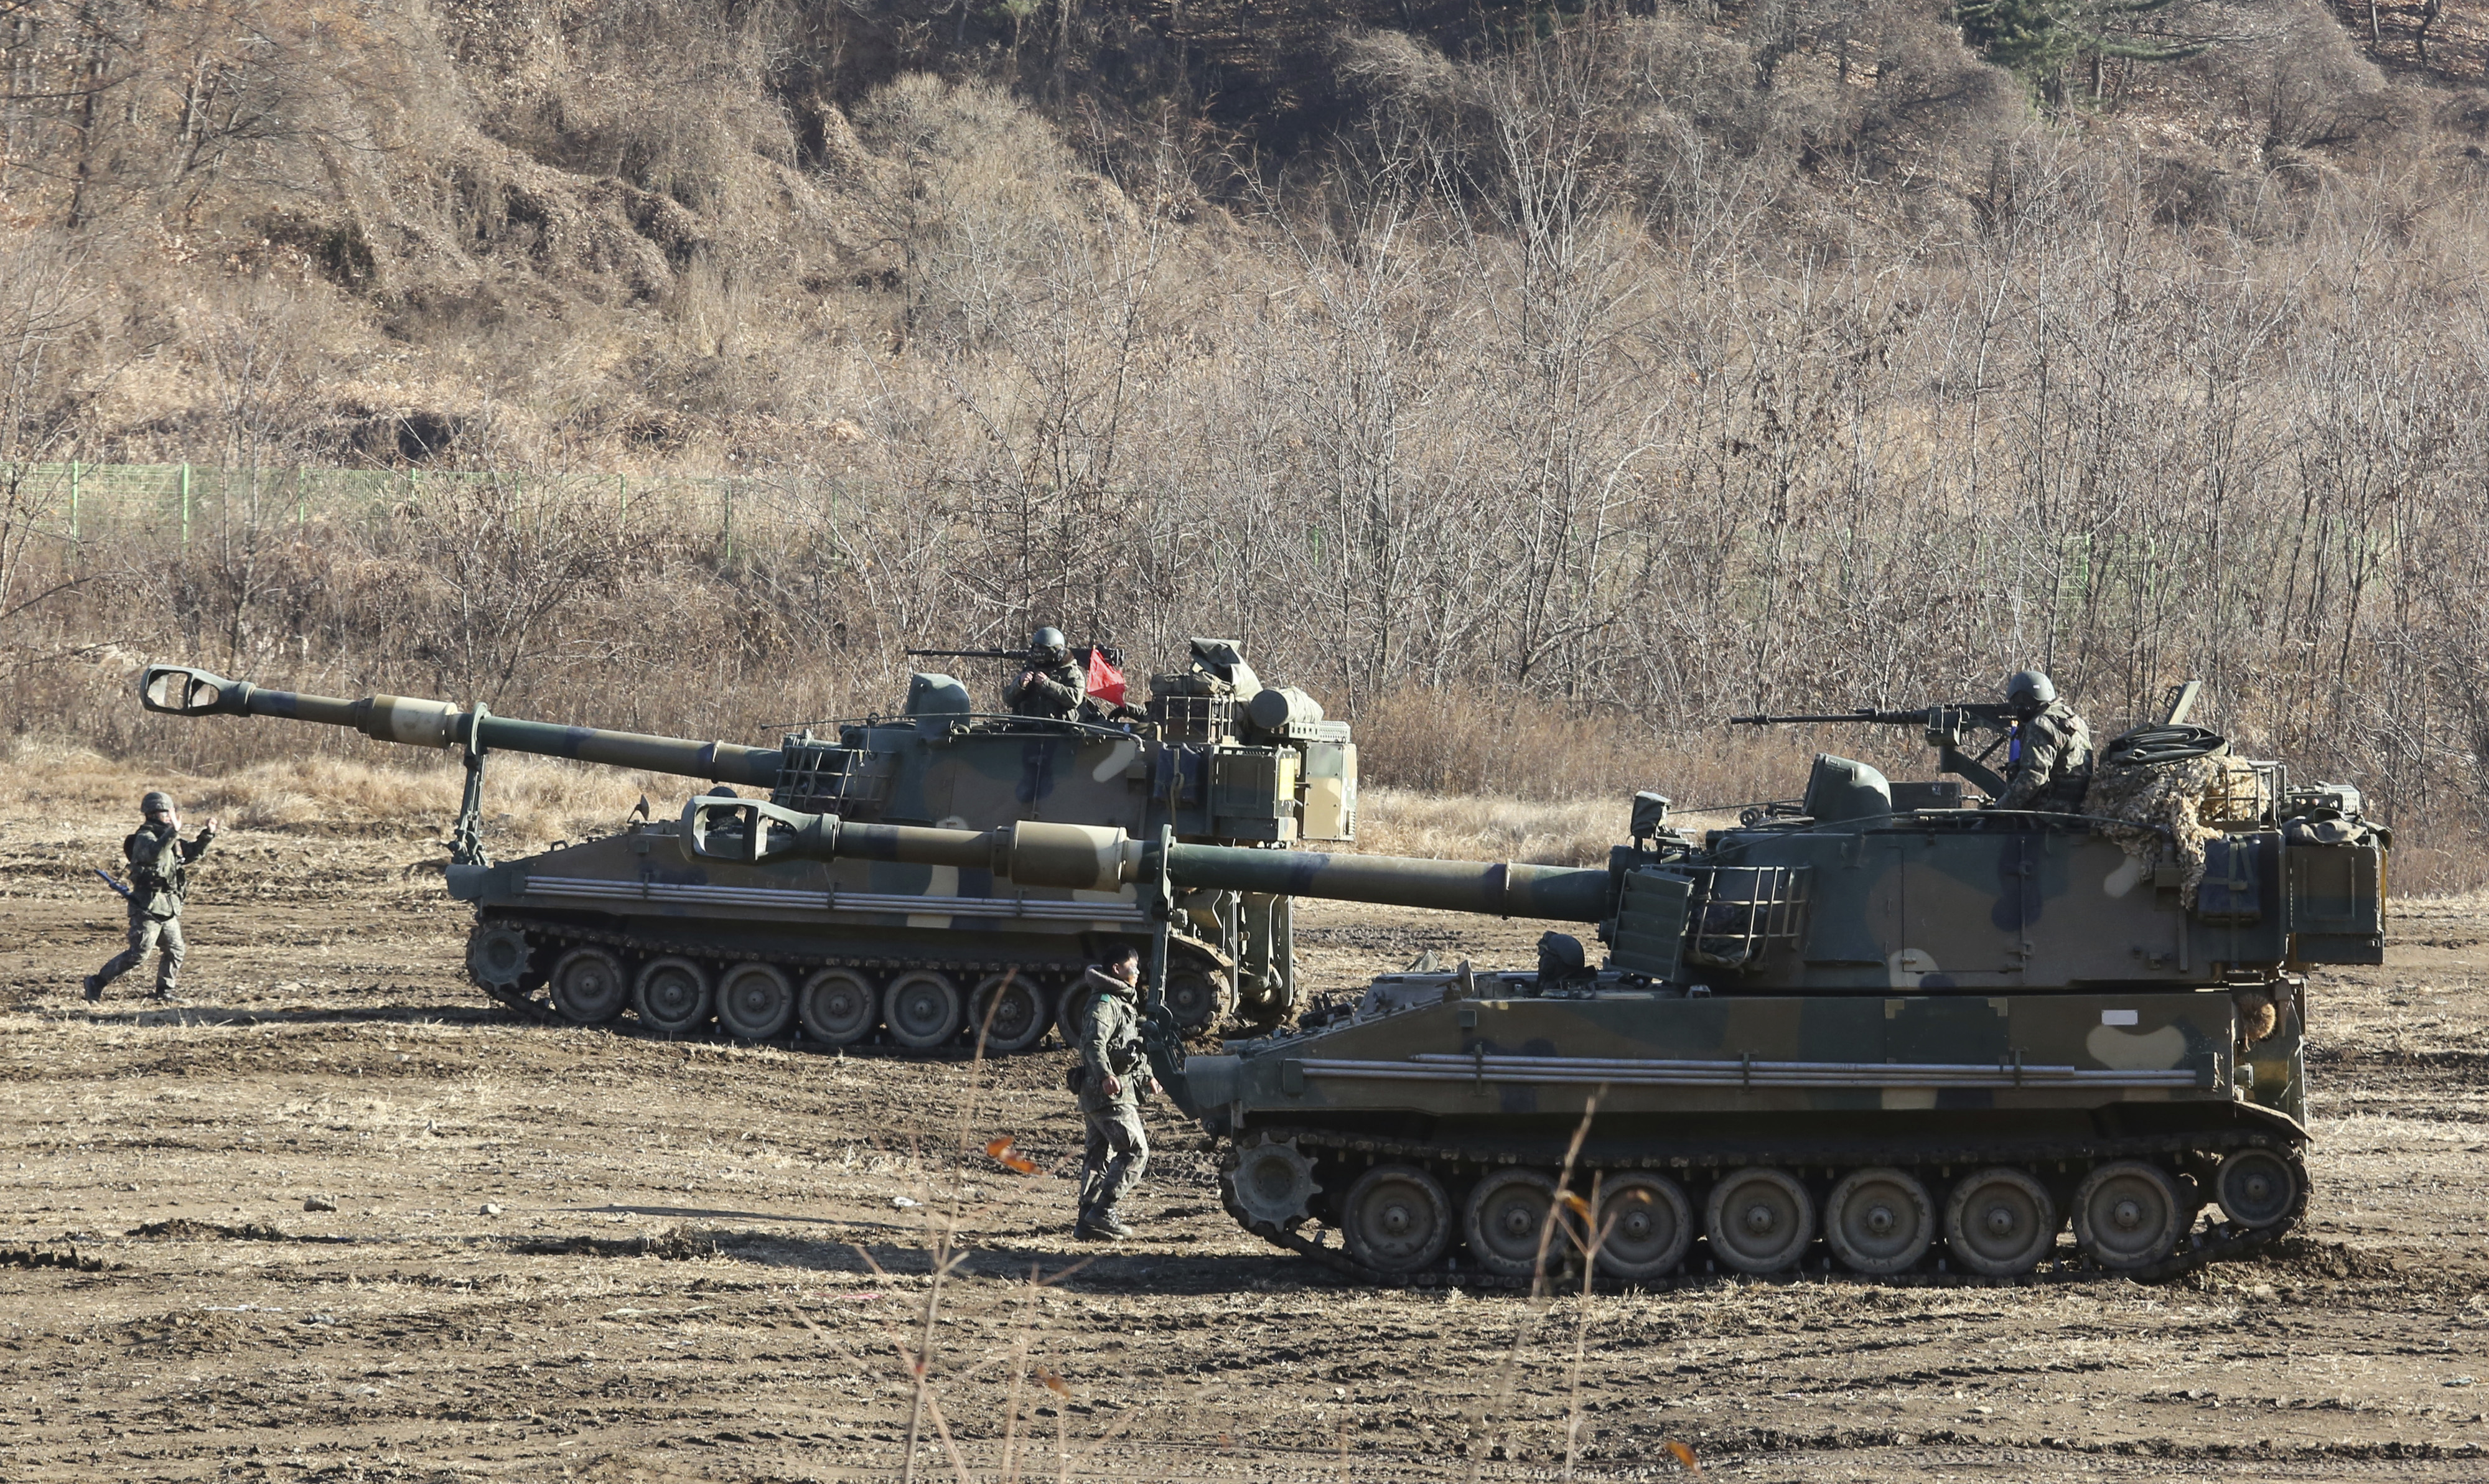 South Korean army's K-55 self-propelled howitzers move during a military exercises in Paju, South Korea, near the border with North Korea, Wednesday, Nov. 29, 2017. After 2 ½ months of relative peace, North Korea launched its most powerful weapon yet early Wednesday, a presumed intercontinental ballistic missile that could put Washington and the entire eastern U.S. seaboard within range. (AP Photo/Ahn Young-joon)